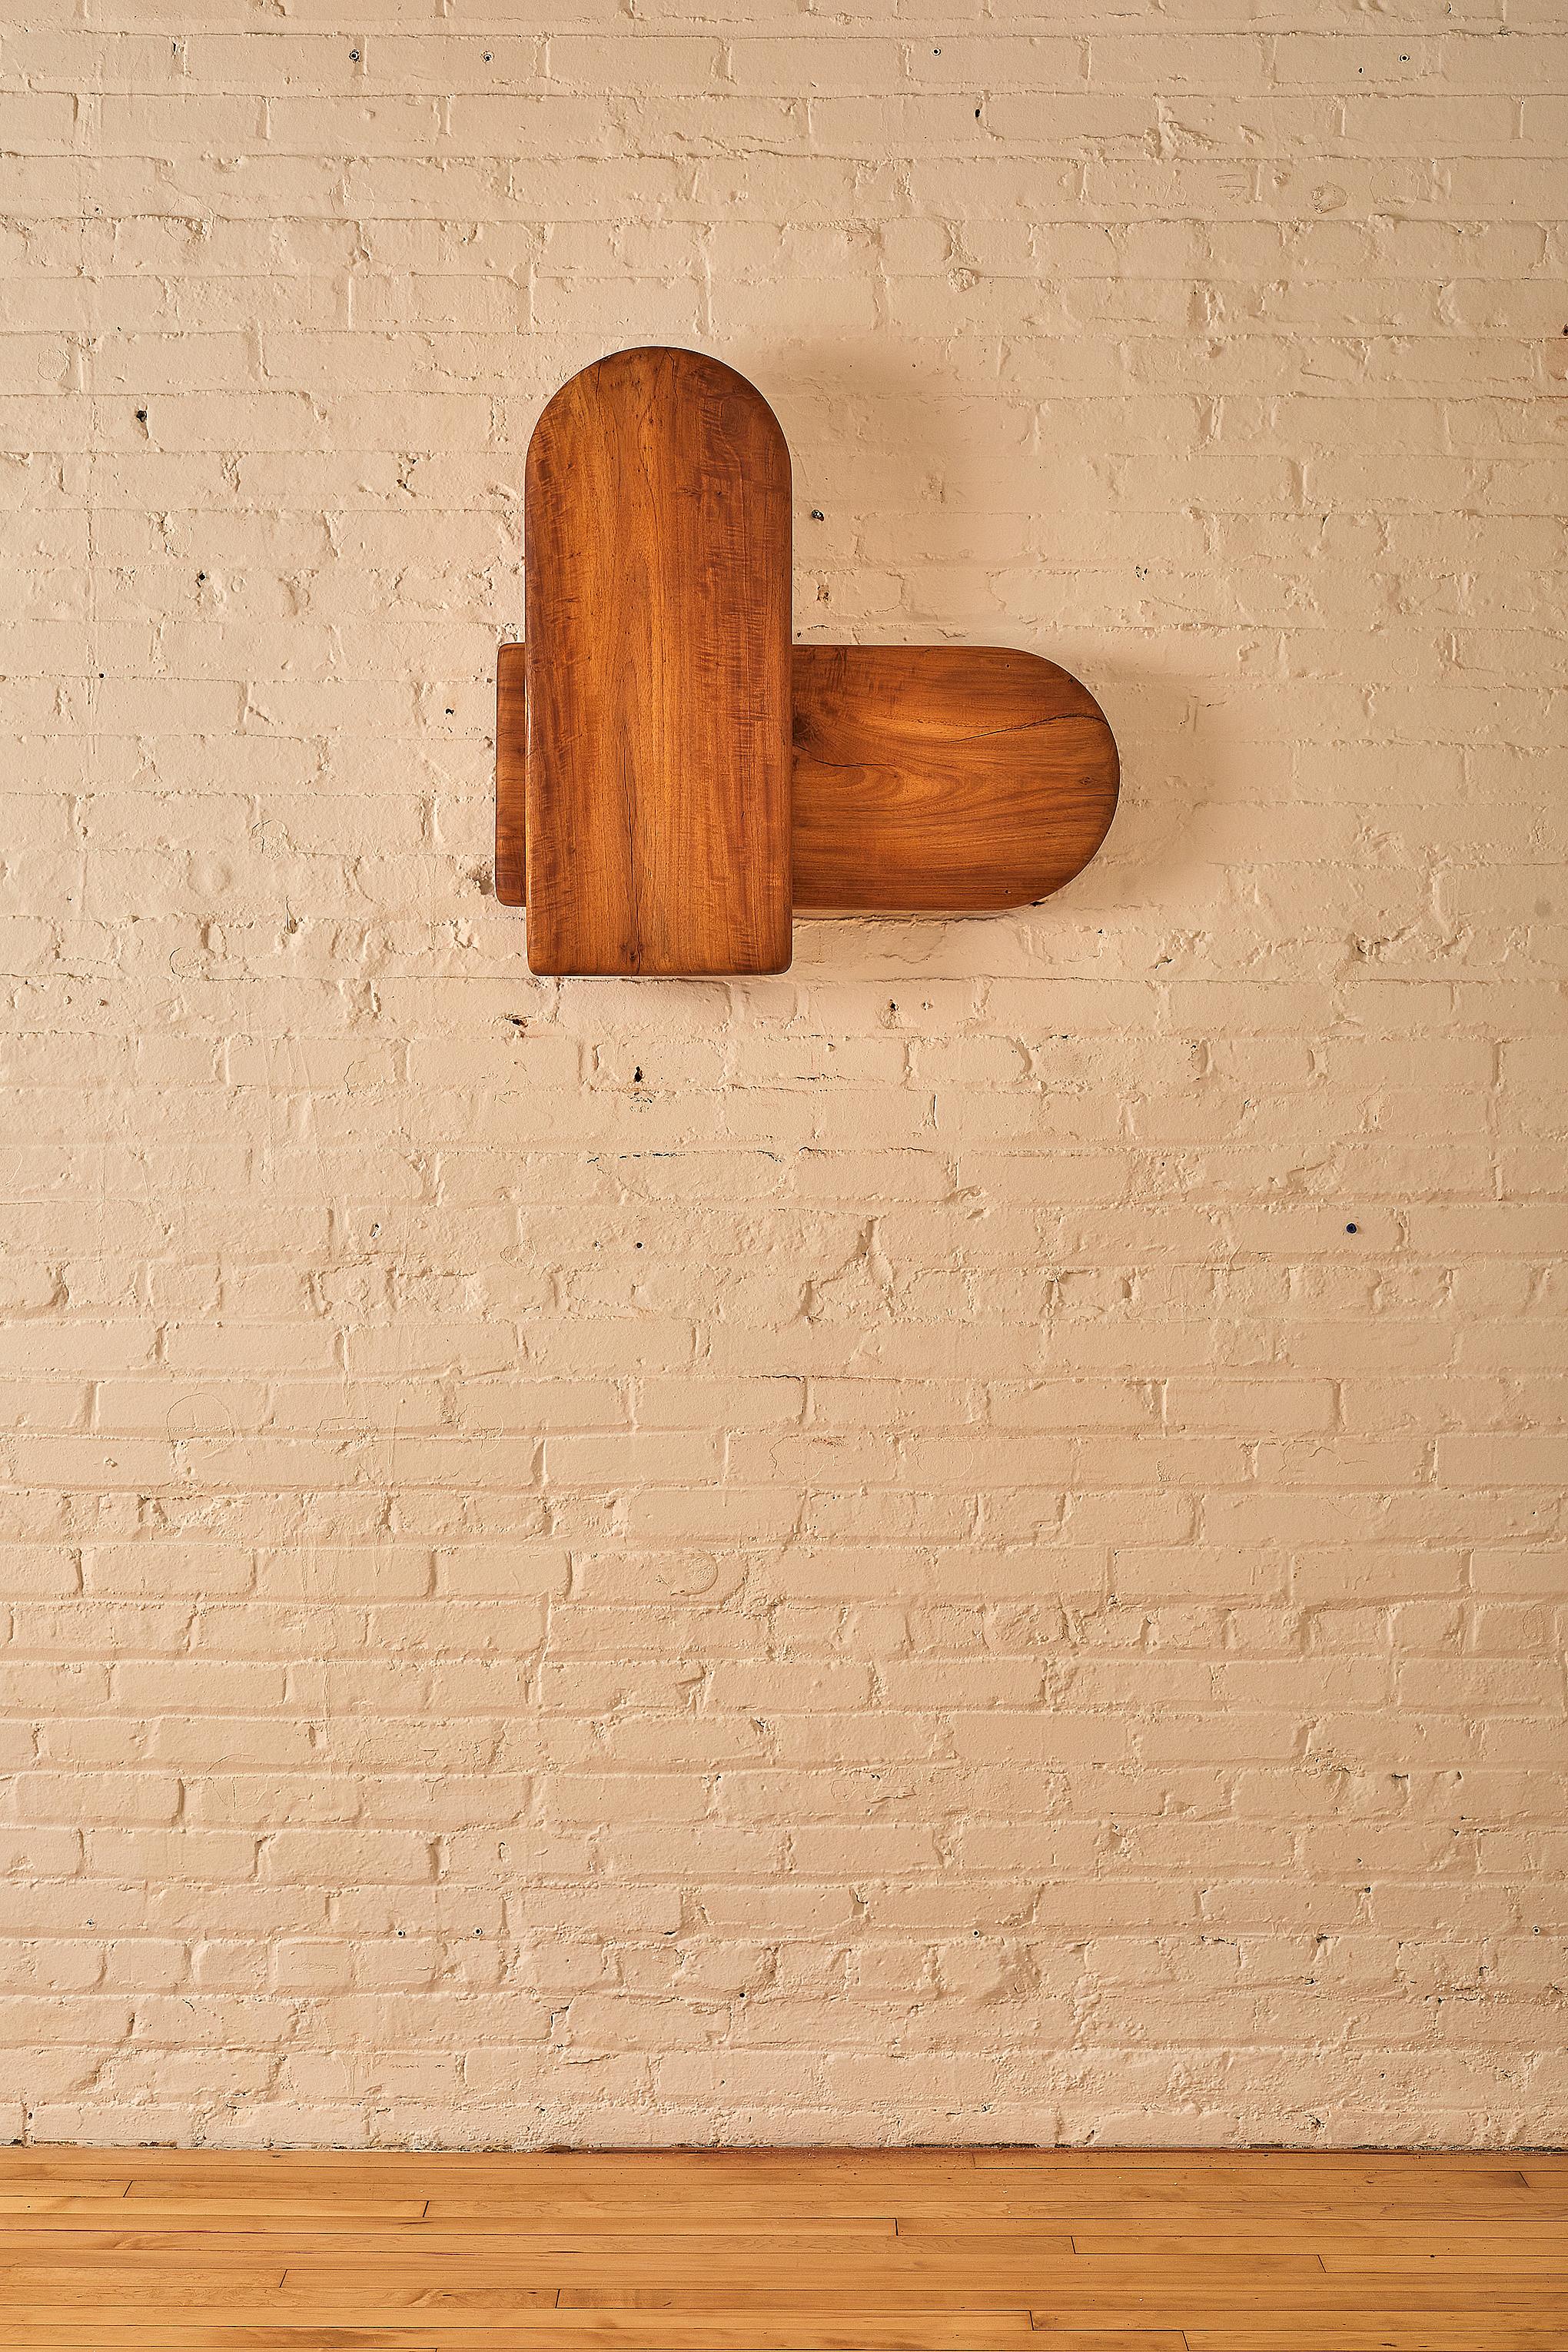 This wood wall sculpture designed by The Somerset House was made in house and adds a warm sculptural element to any room.

